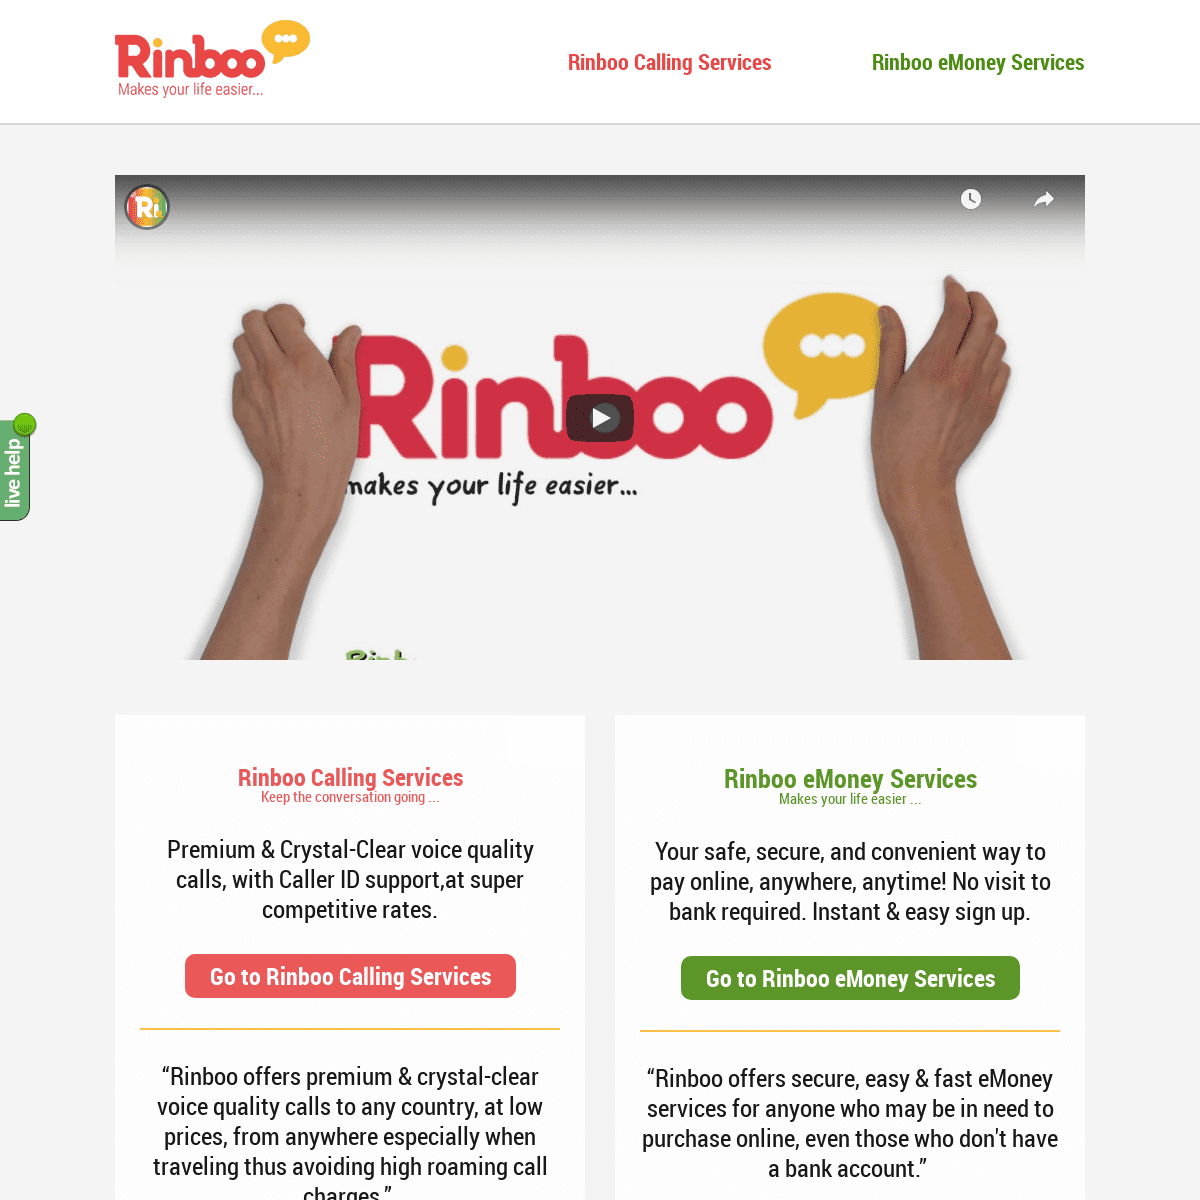 Rinboo :: Makes your life easier